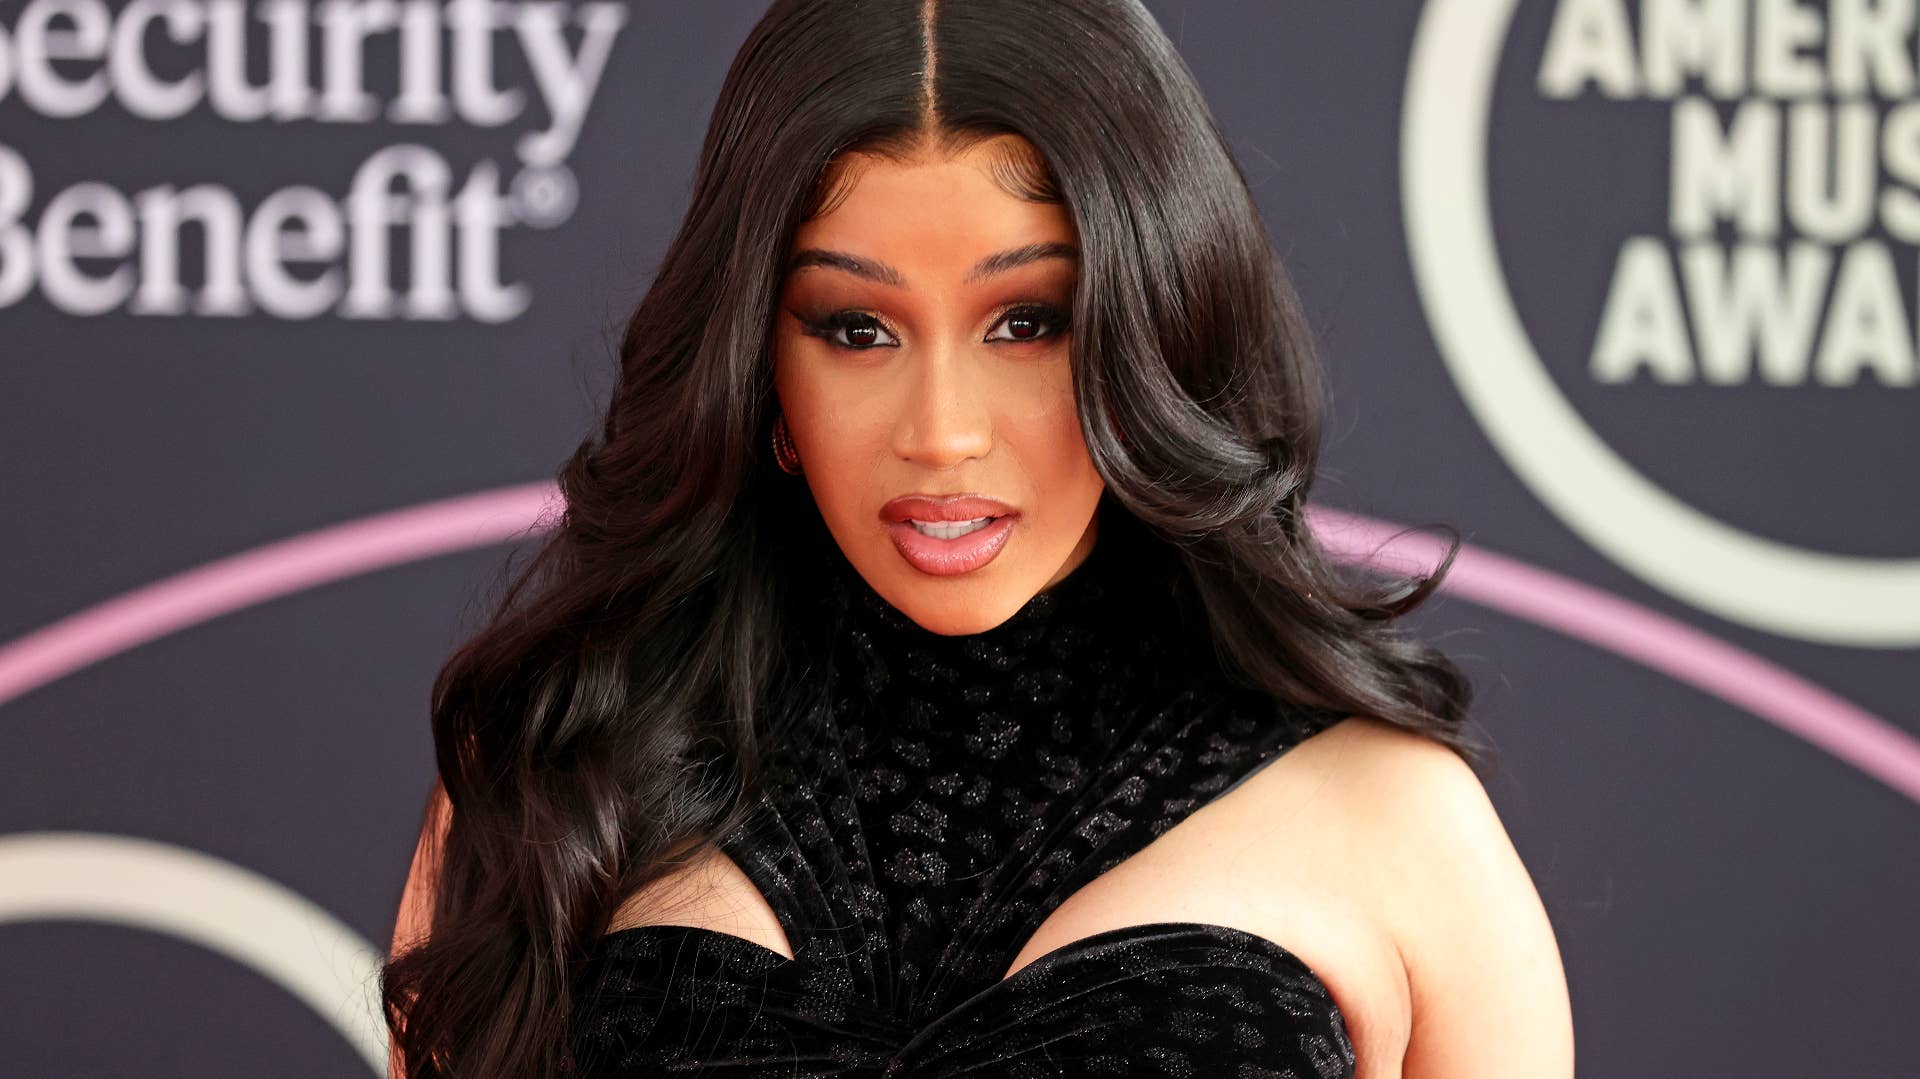 Cardi B attends the 2021 American Music Awards Red Carpet.